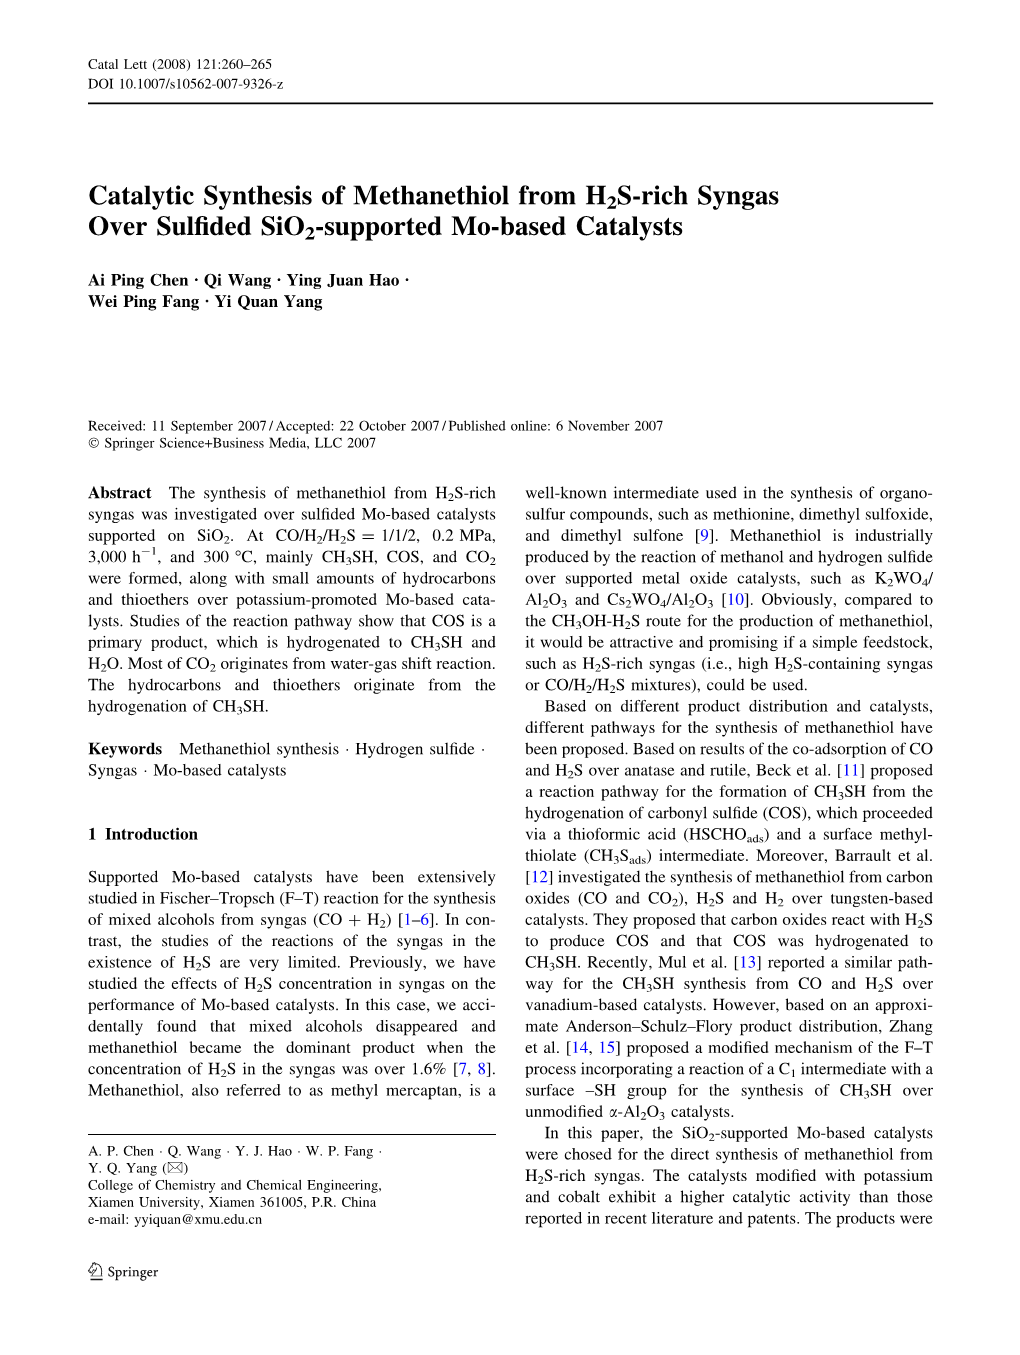 Catalytic Synthesis of Methanethiol from H2S-Rich Syngas Over Sulﬁded Sio2-Supported Mo-Based Catalysts